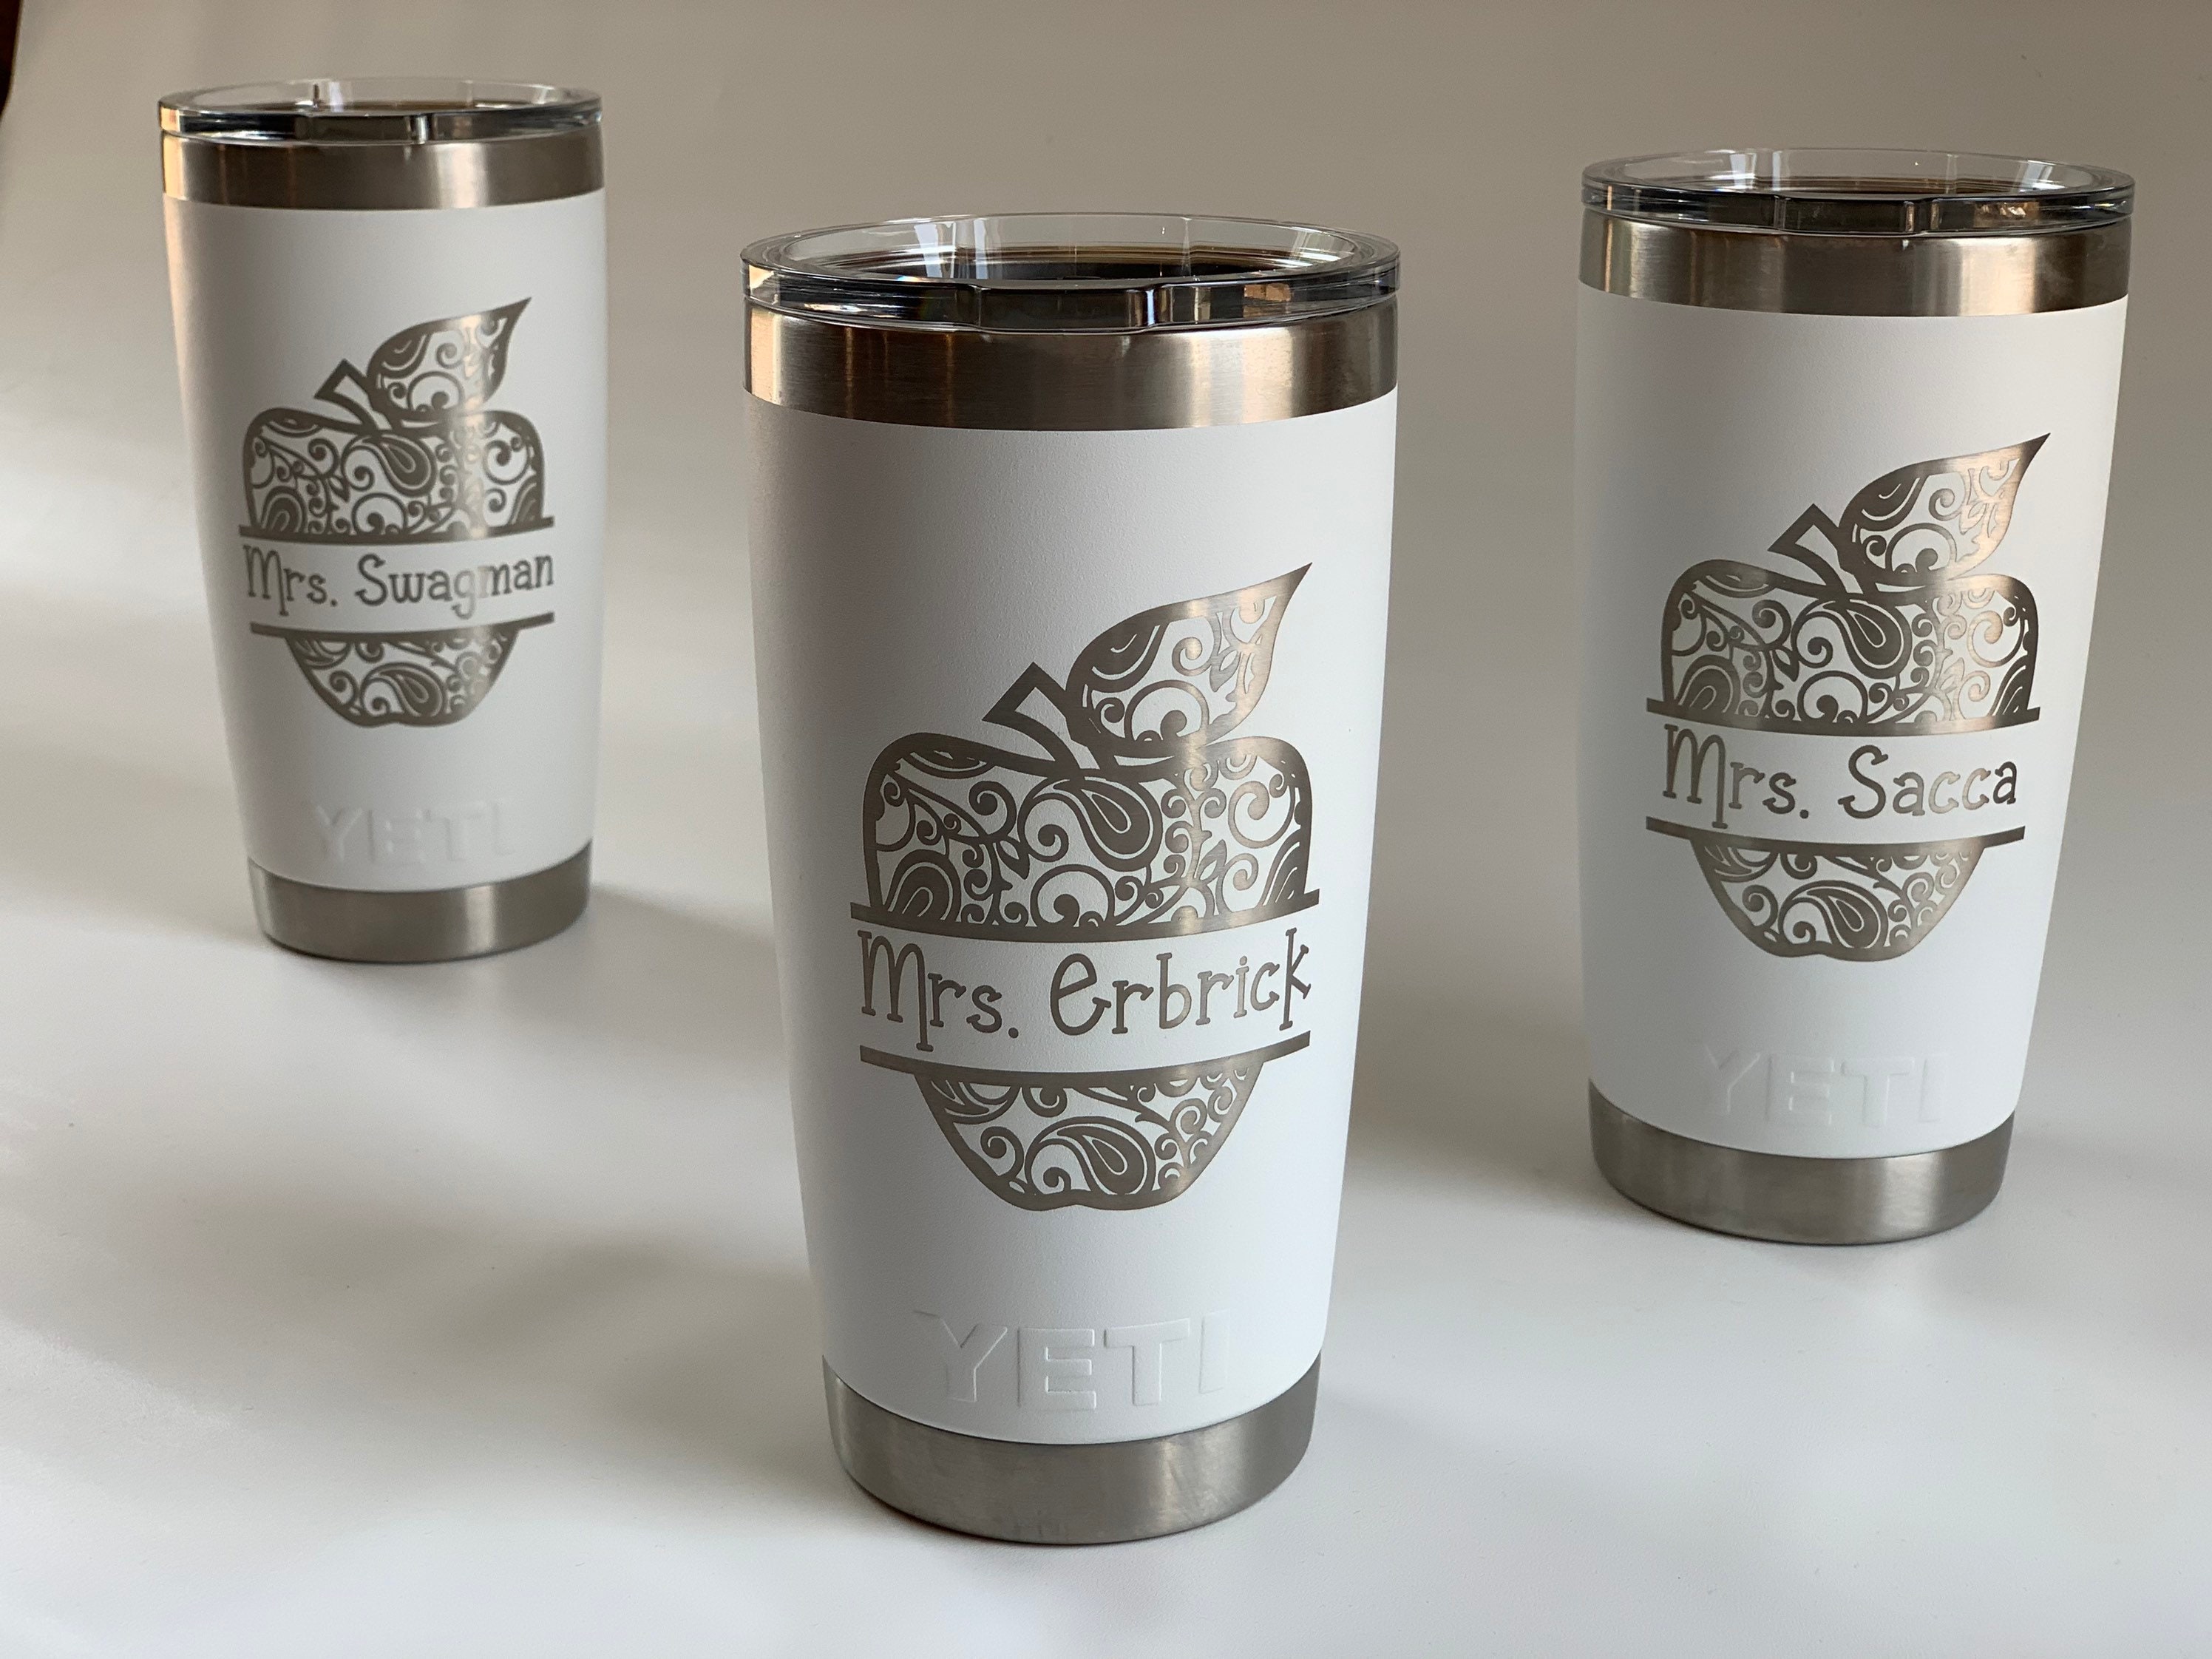 Engraved Yeti for Teacher, Educator Gift, Teacher Appreciation, Yeti Cup  Personalized, Teach Love Inspire, Fathers Gift for Teacher -  Israel